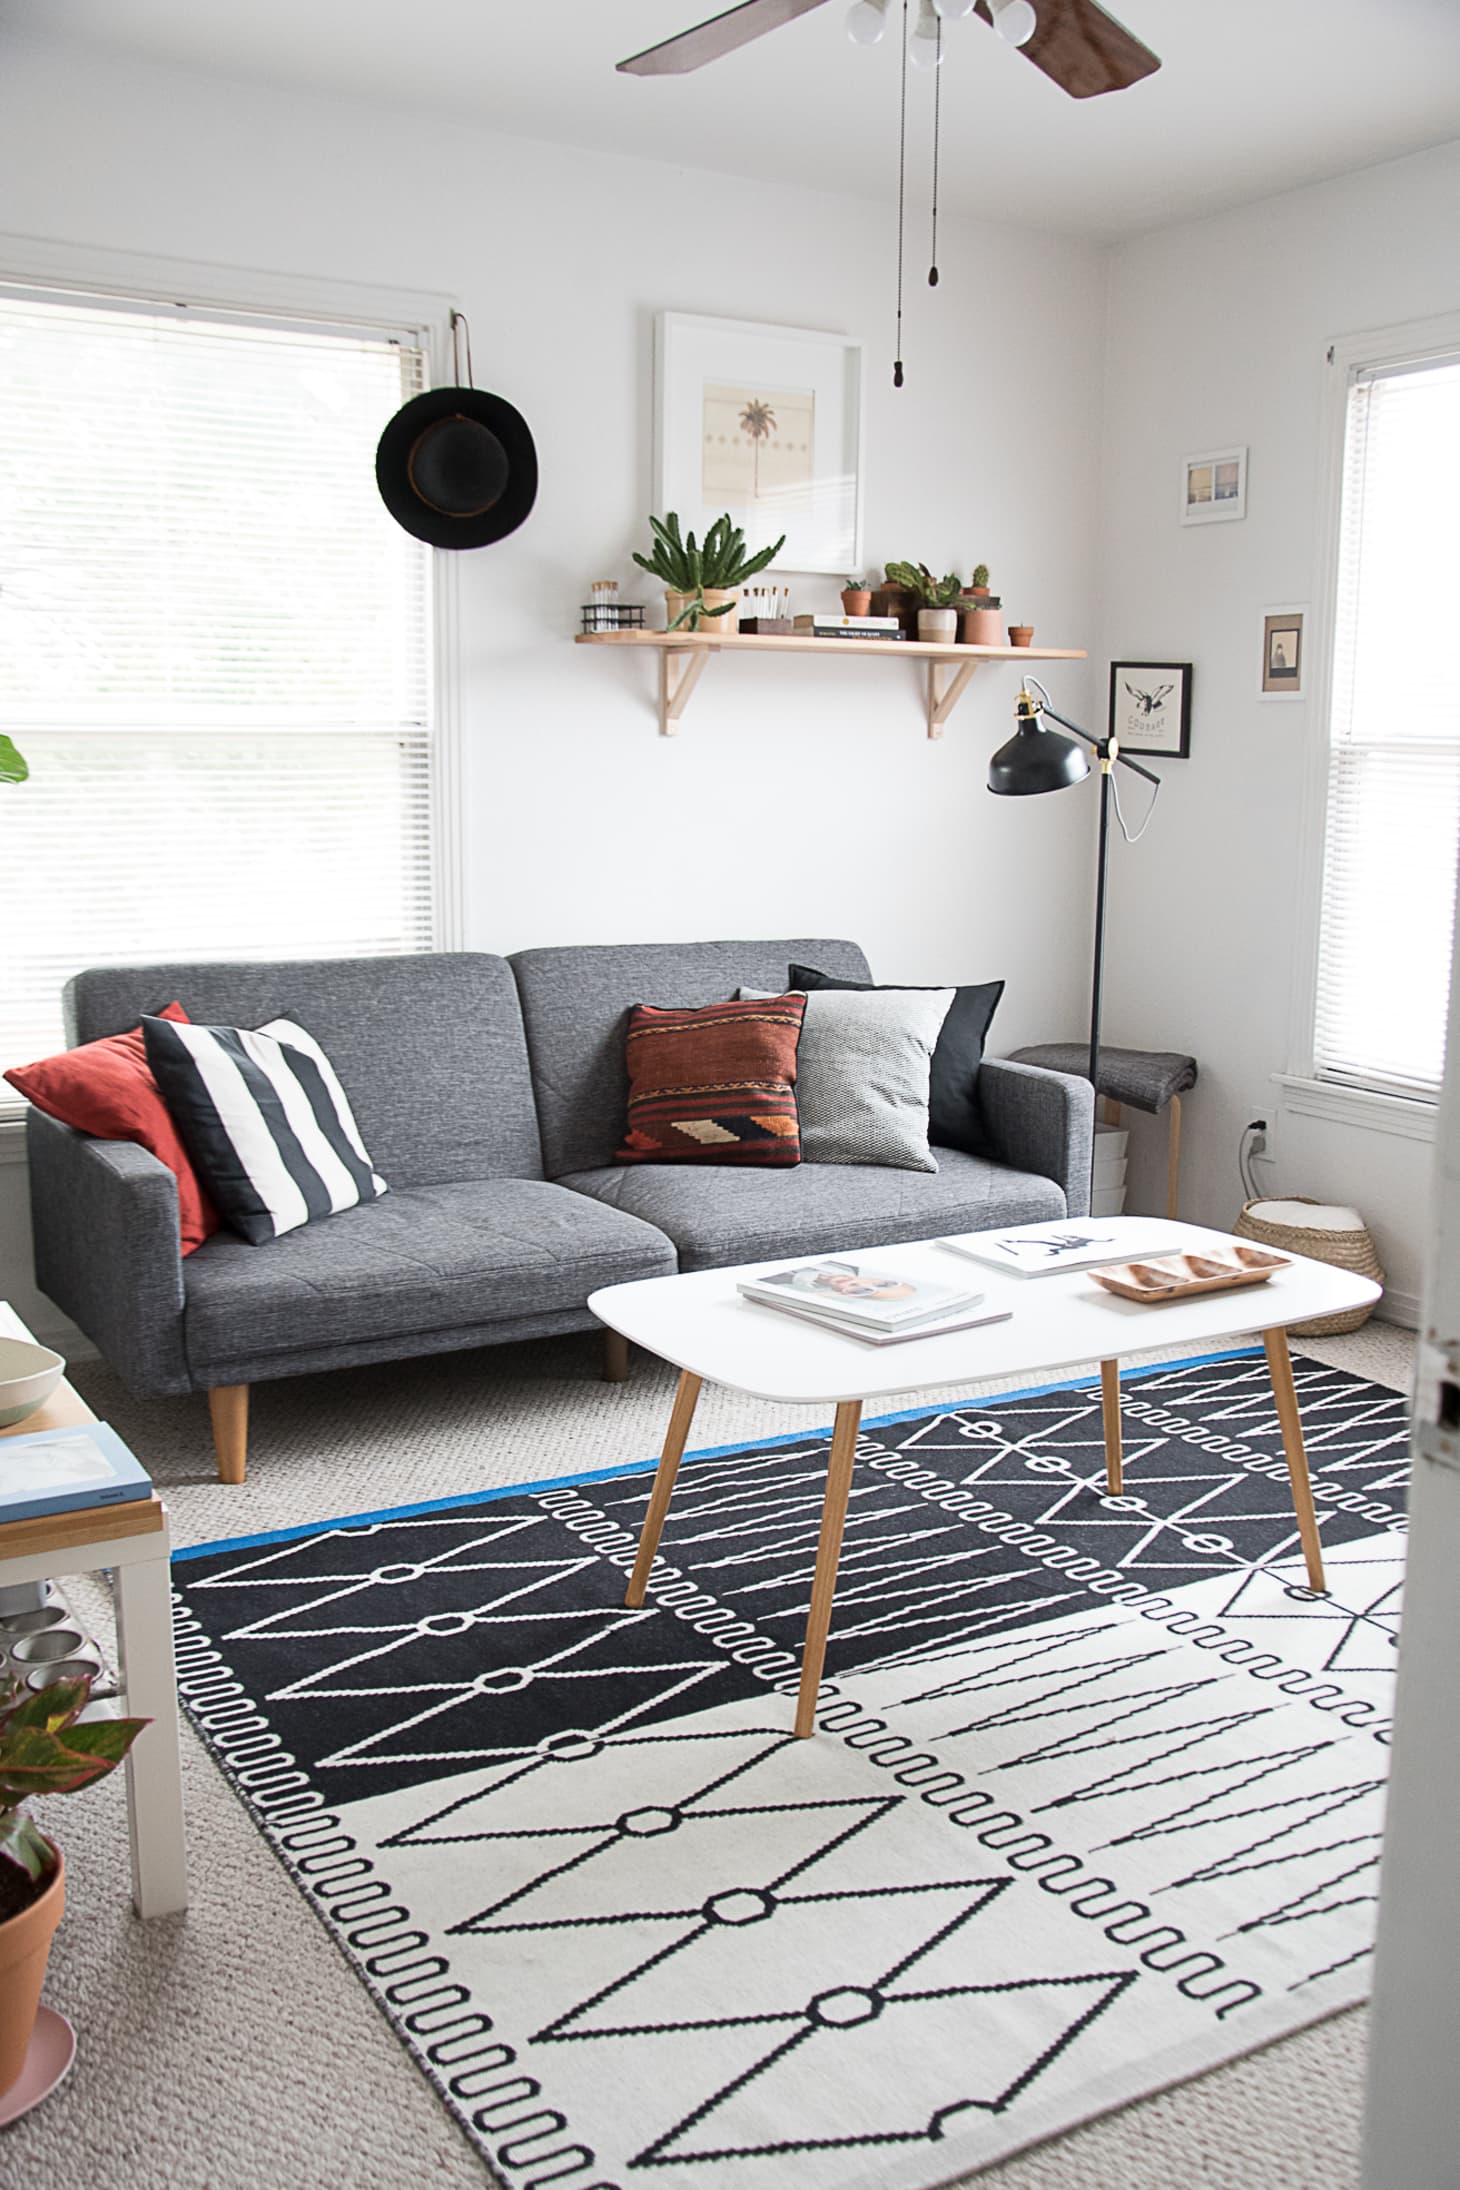 Decorating Small Space Living Room: Maximizing Style And Functionality